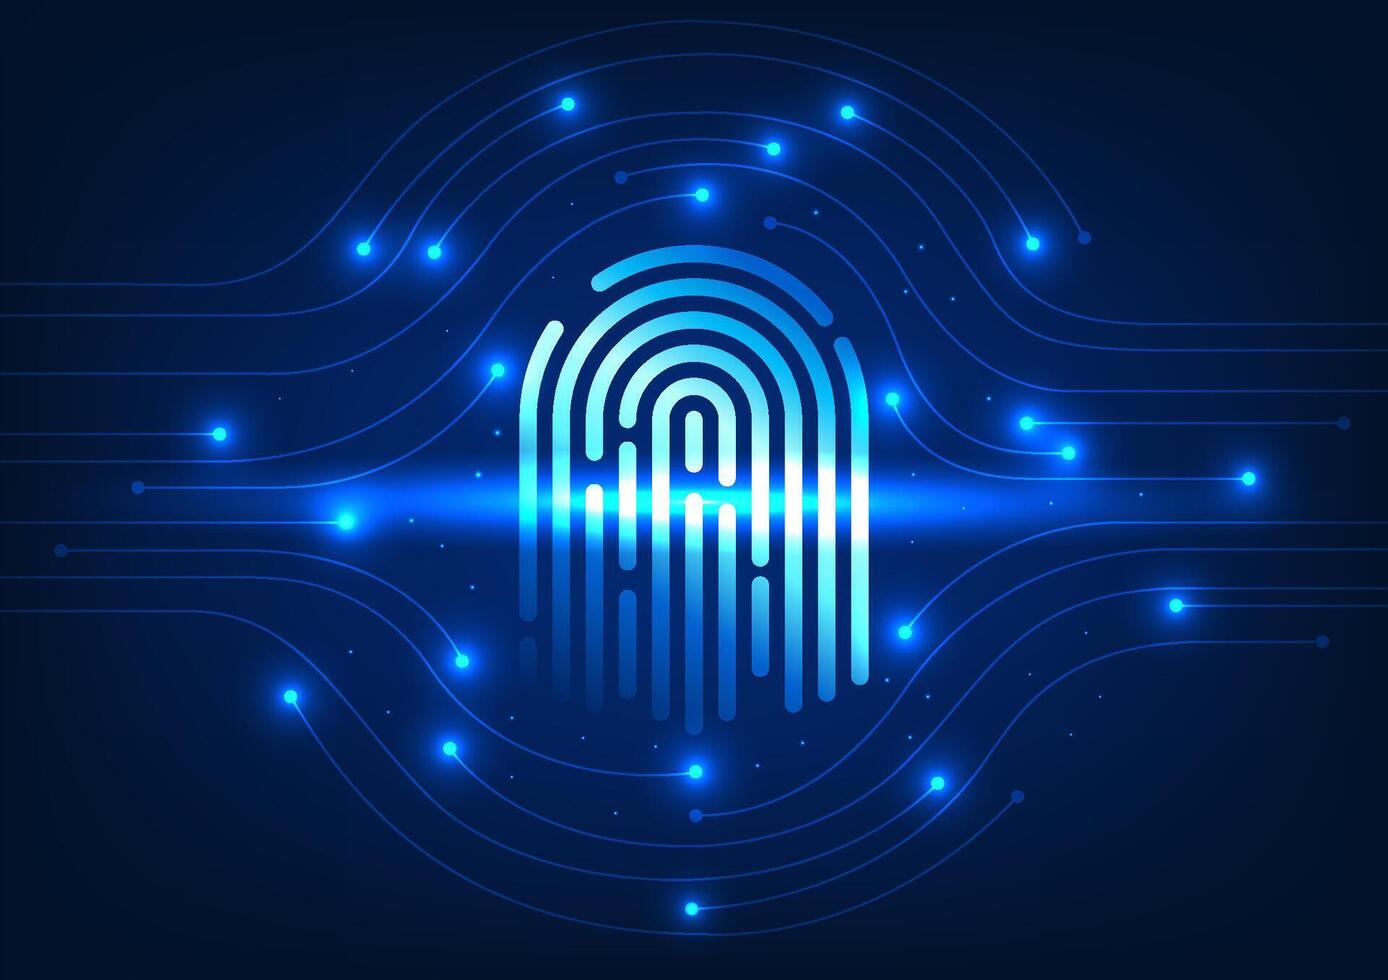 Cyber security technology Fingerprints connected to the circuit Demonstrates safety technology Use fingerprint scanning to access personal information. It is a system with high security. vector